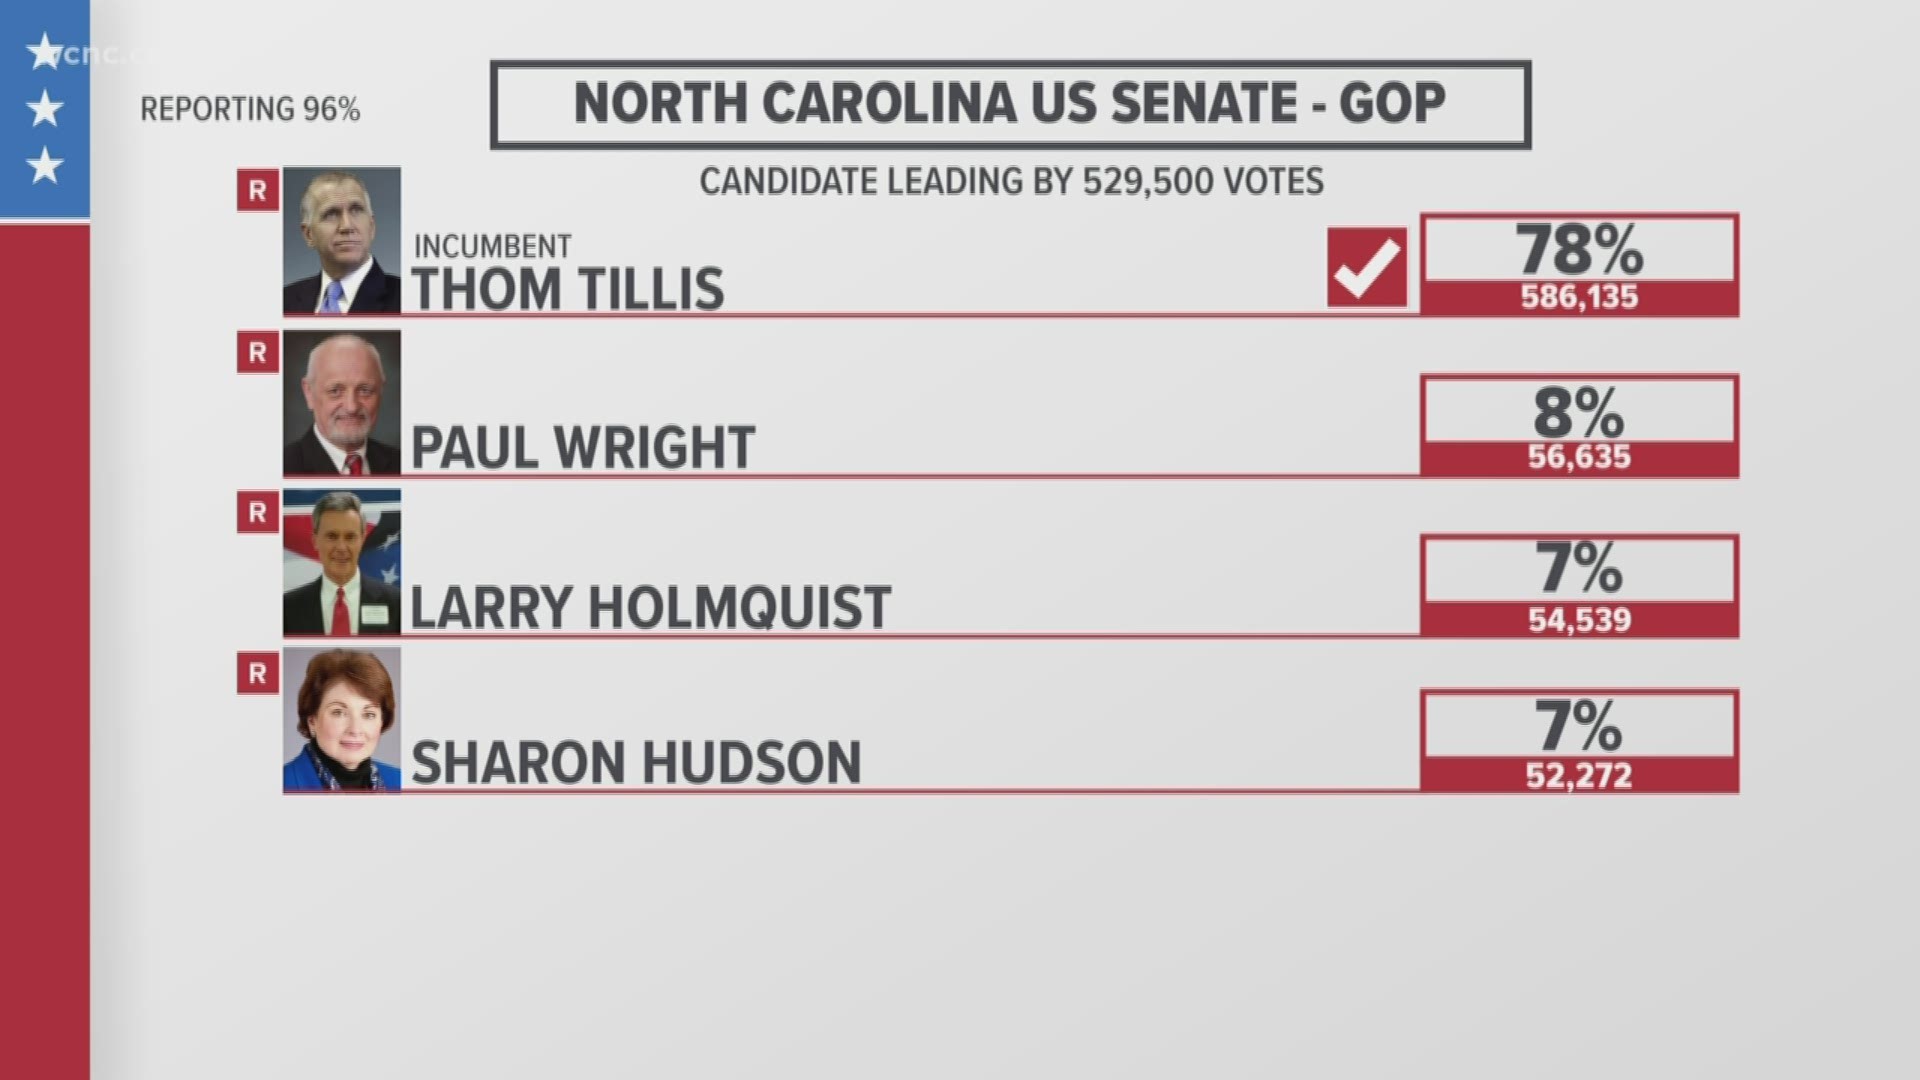 Thom Tillis was considered the odds-on favorite in the primary, but his challenge will likely come in the general election.